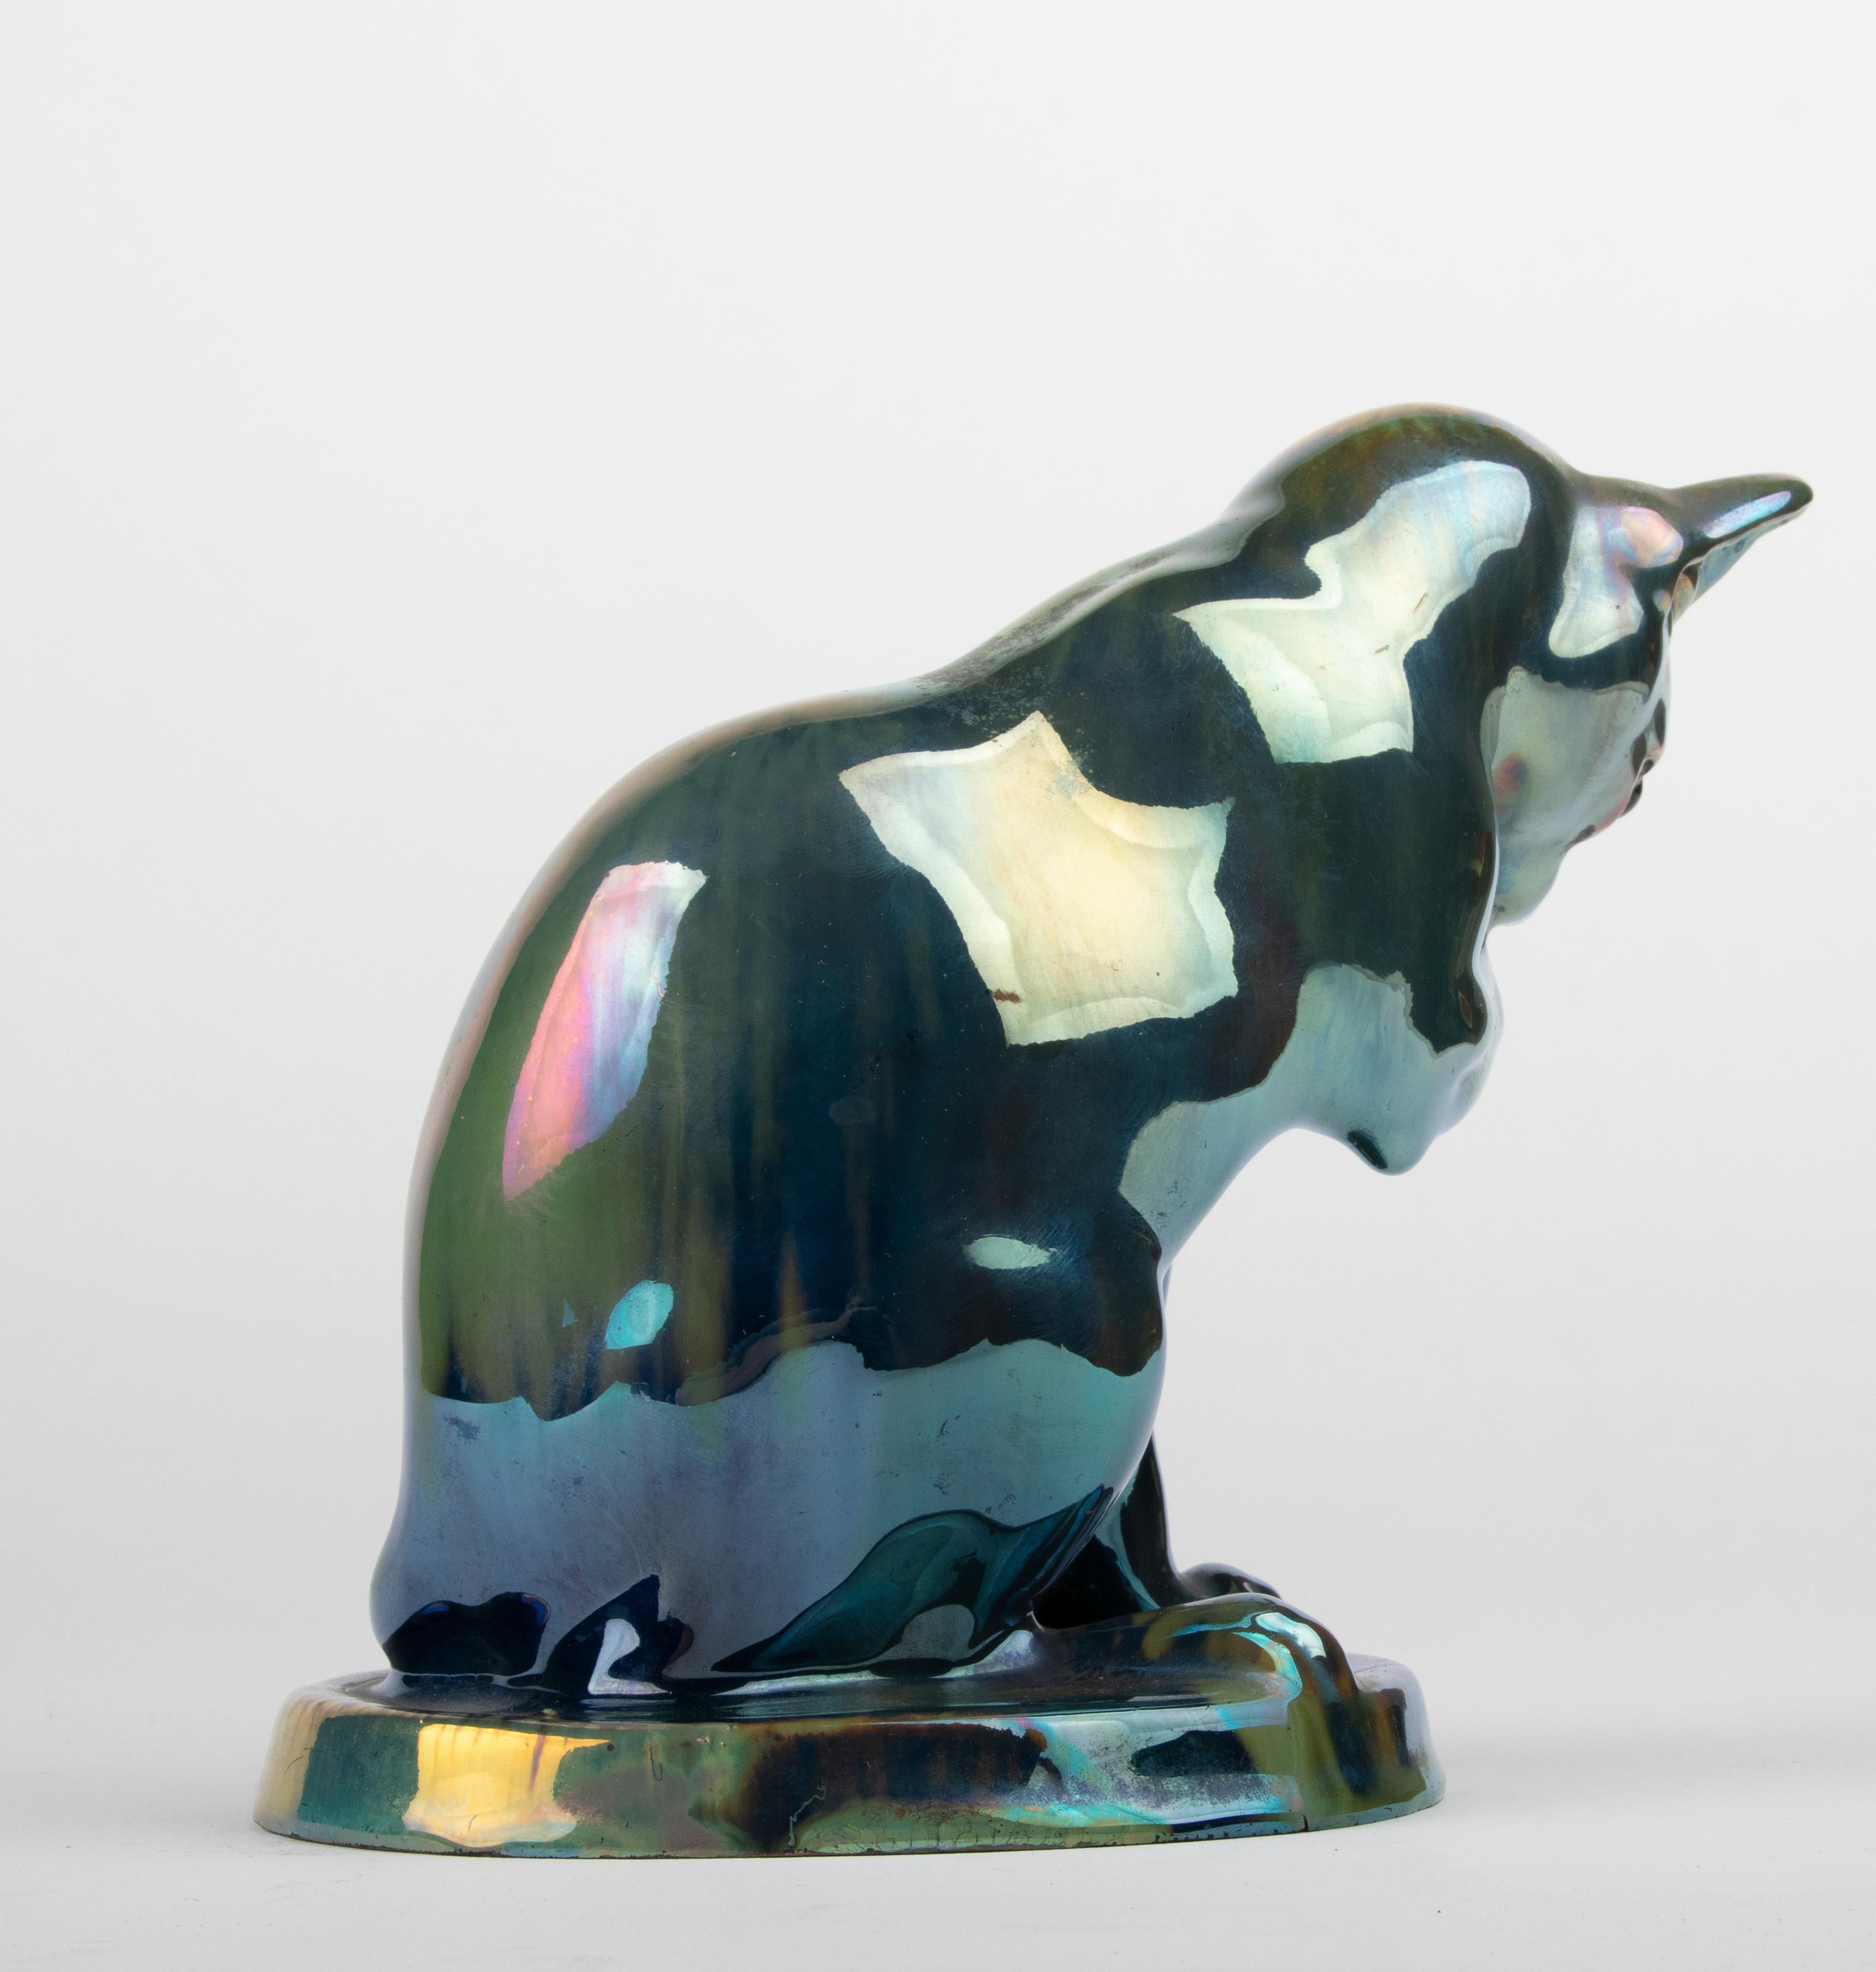 1930's Ceramic Cat Figure with Iridescent Glaze, Alph. Cytère Rambervilliers For Sale 7